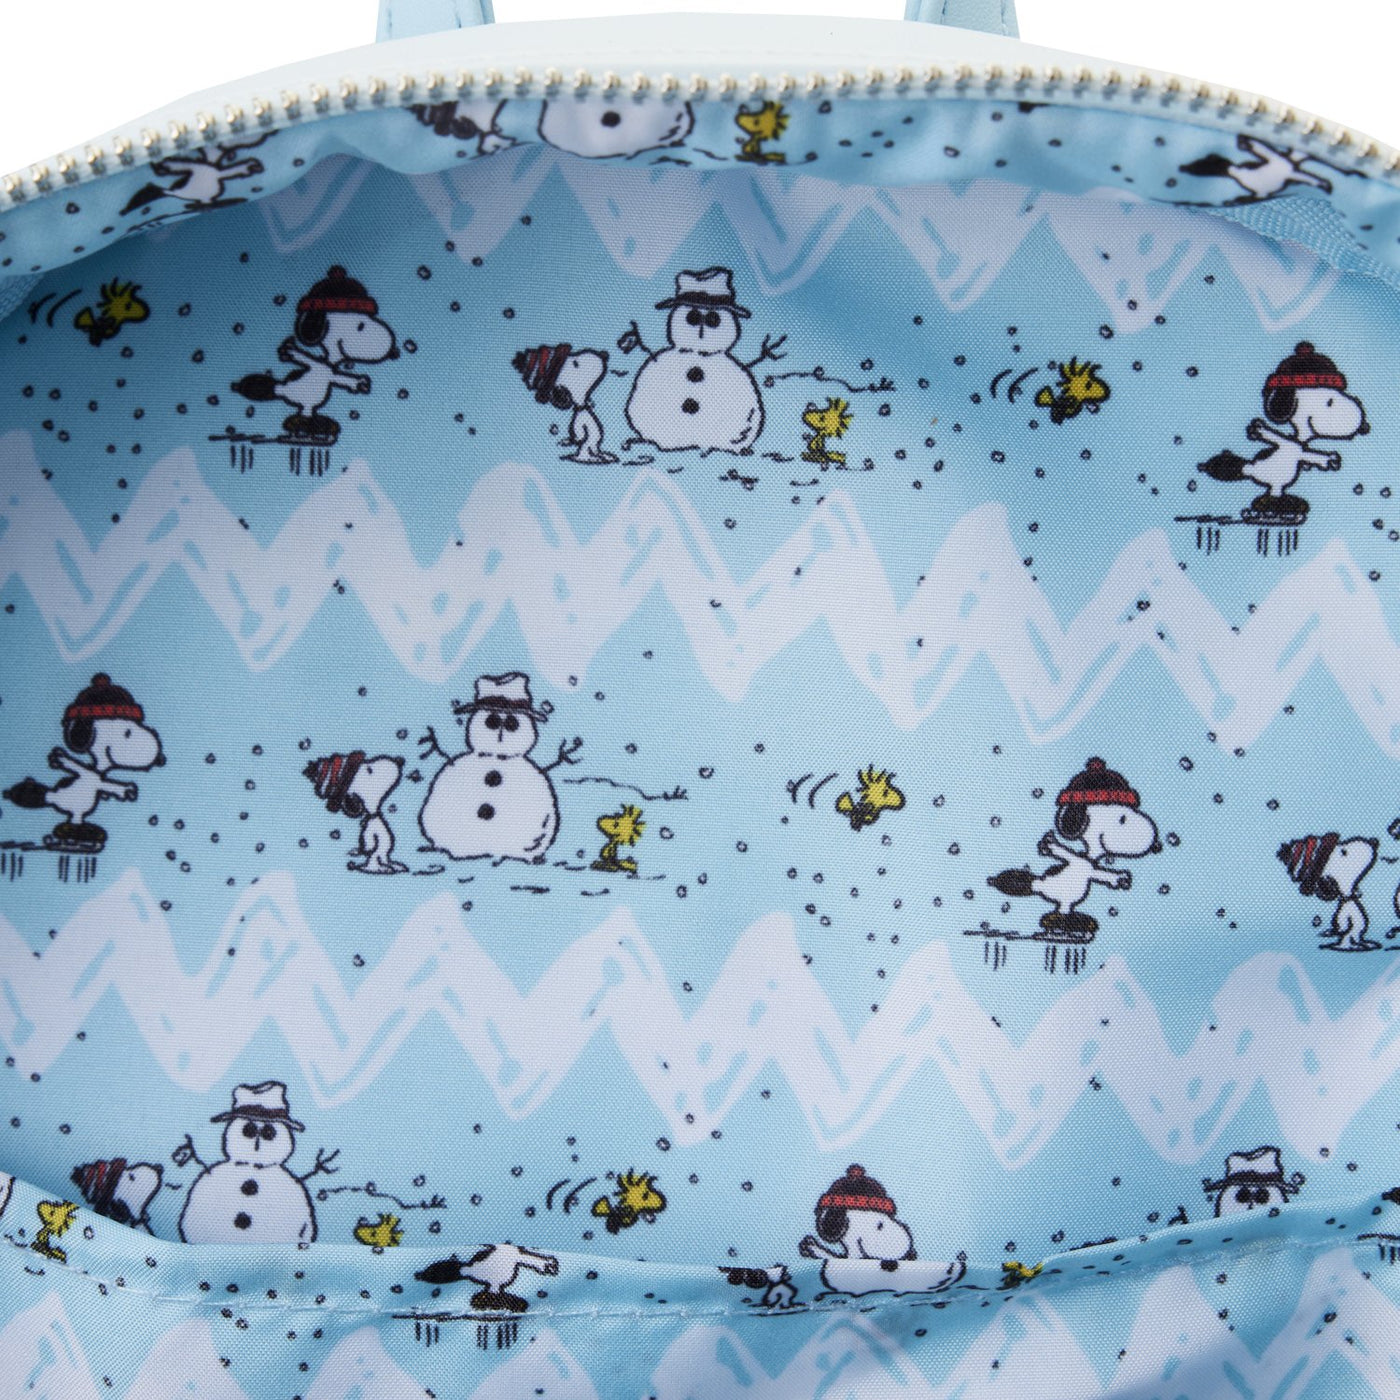 Loungefly Peanuts Charlie Brown Ice Skating Mini Backpack - Interior Lining